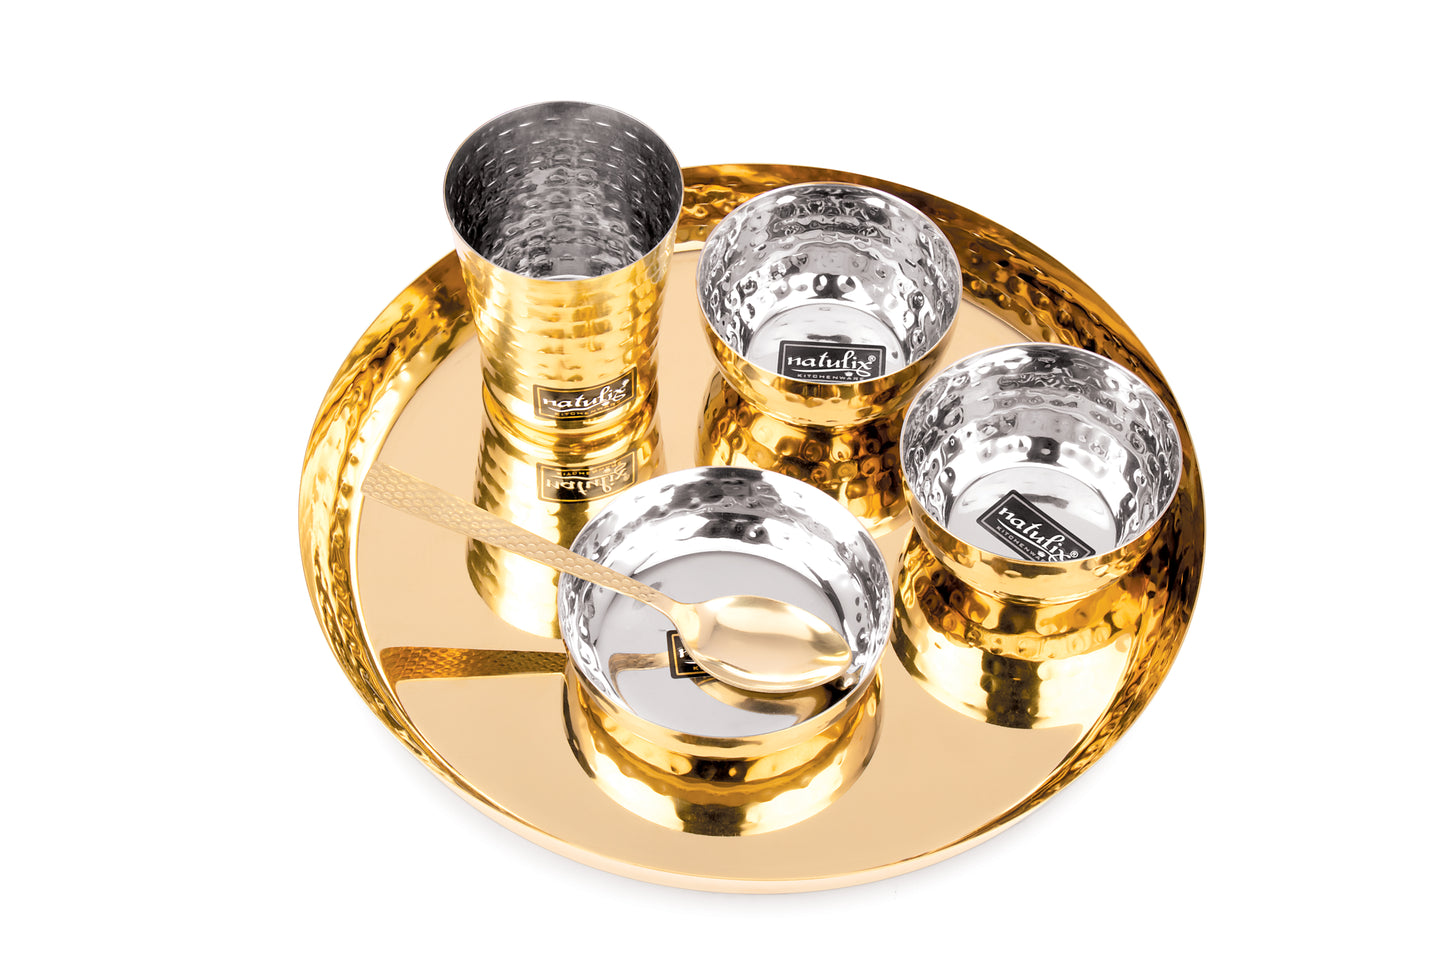 NATULIX Royal Stainless Steel Gold Hammered Finish Dinner Set of 6 Pcs ( 1 Thali, 2 Bowl, 1 Sweet Plate, 1 Spoon & 1 Glass)